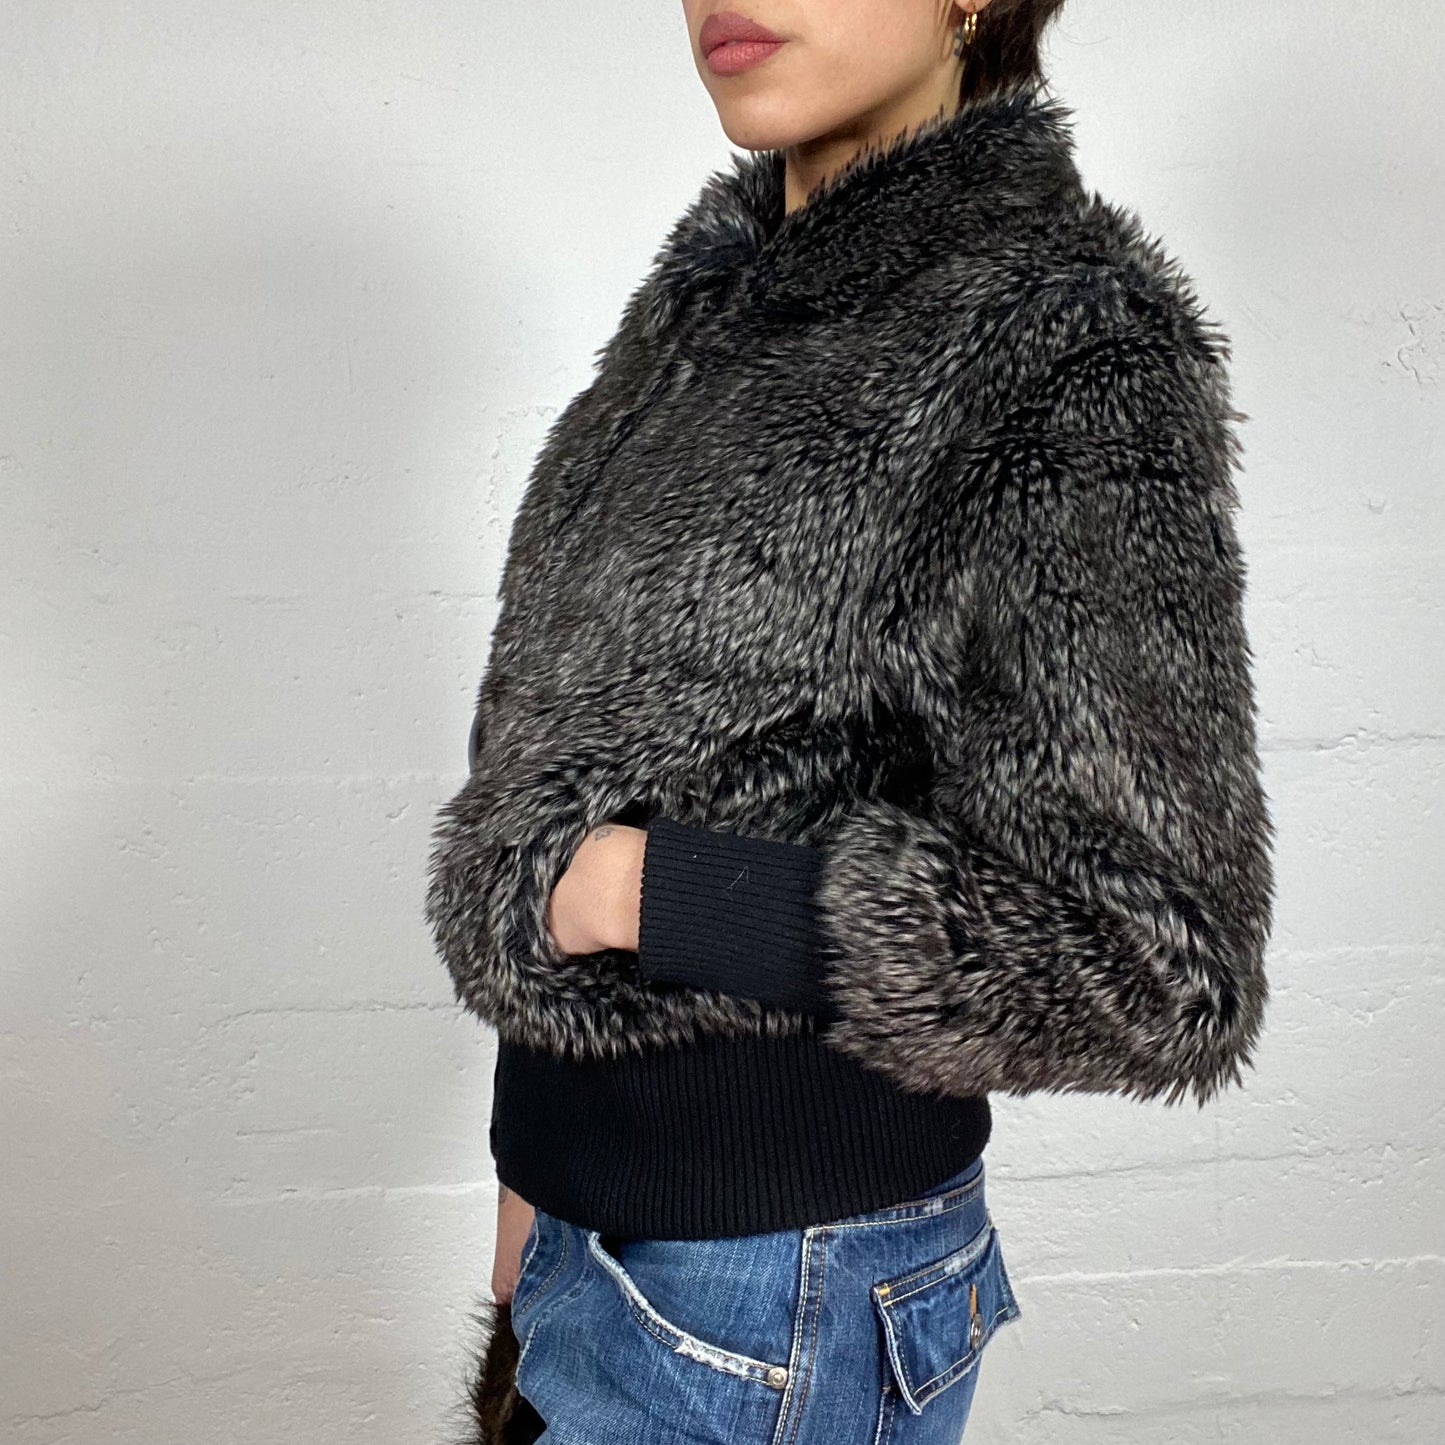 Vintage 2000's Downtown Girl Fur Grey Bomber Jacket with Leather Trims (M)